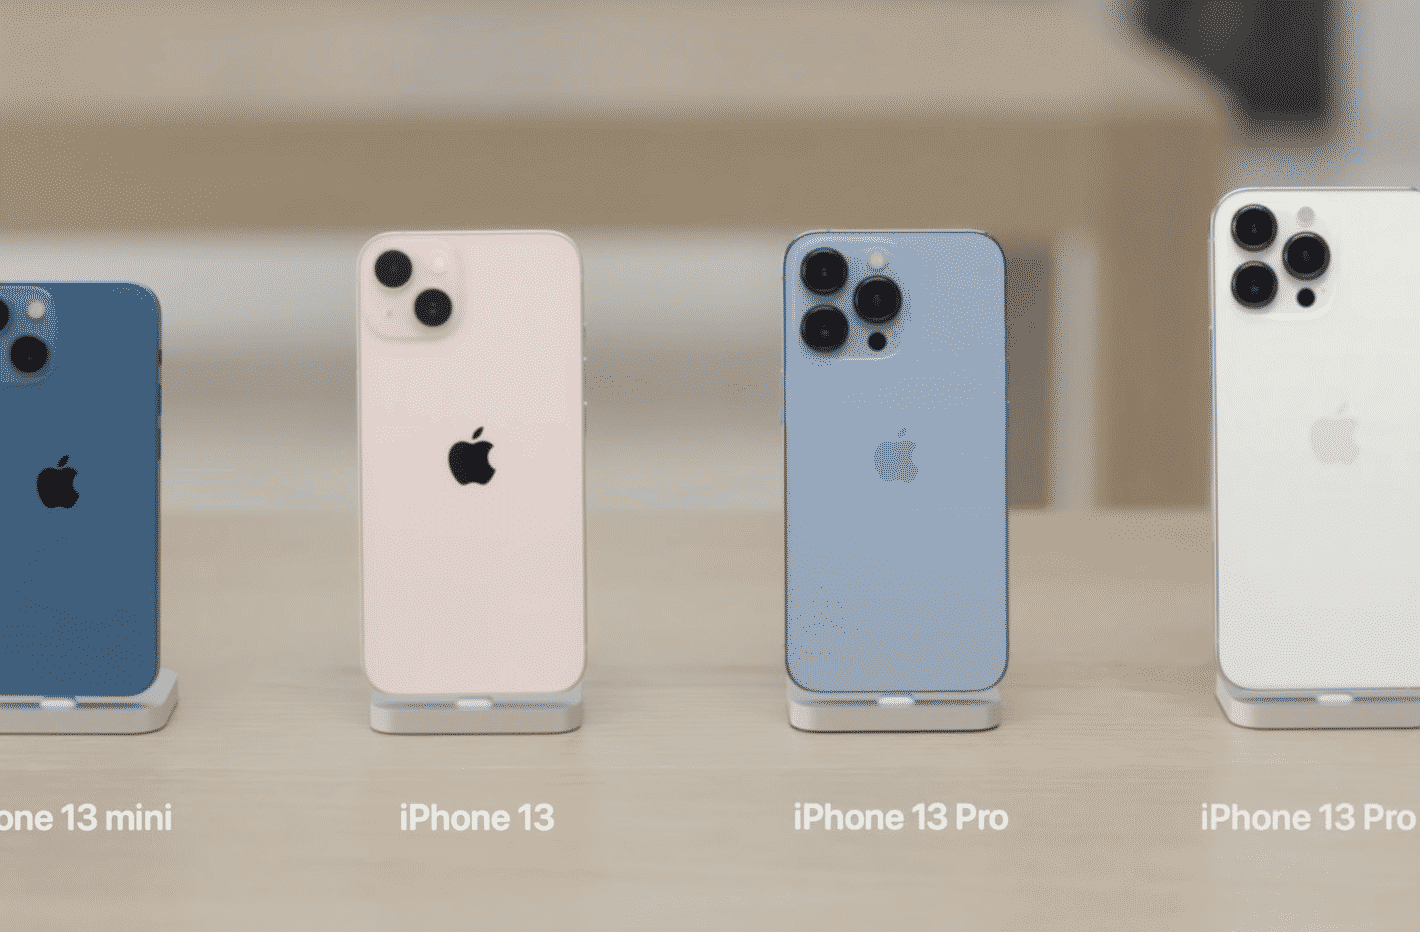 iPhone 13 Pro and iPhone 13